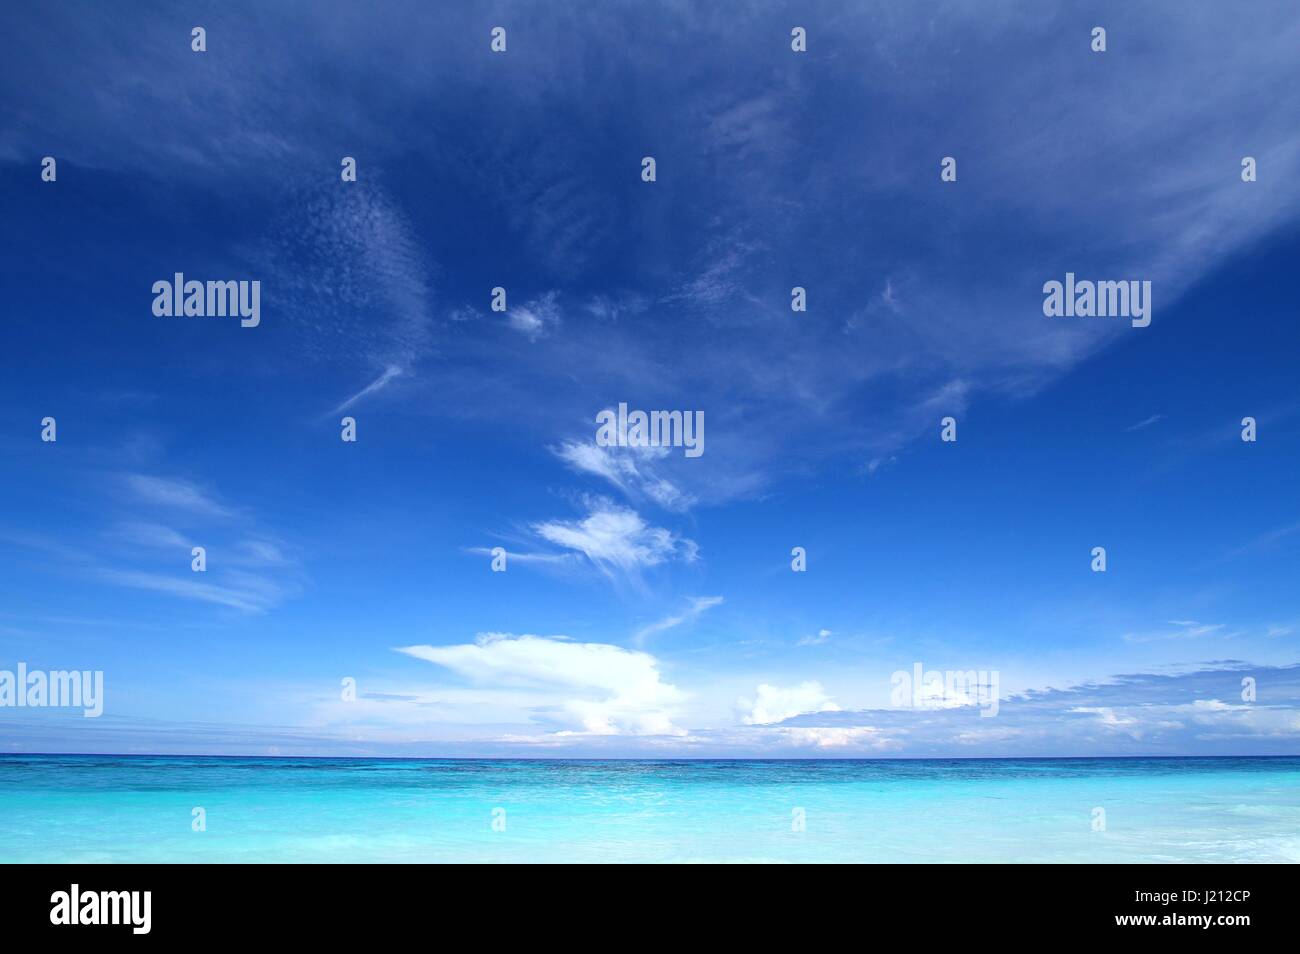 Beautiful tropical seascape with clear blue sky and soft white clouds. Tachai island, Andaman sea, Thailand Stock Photo